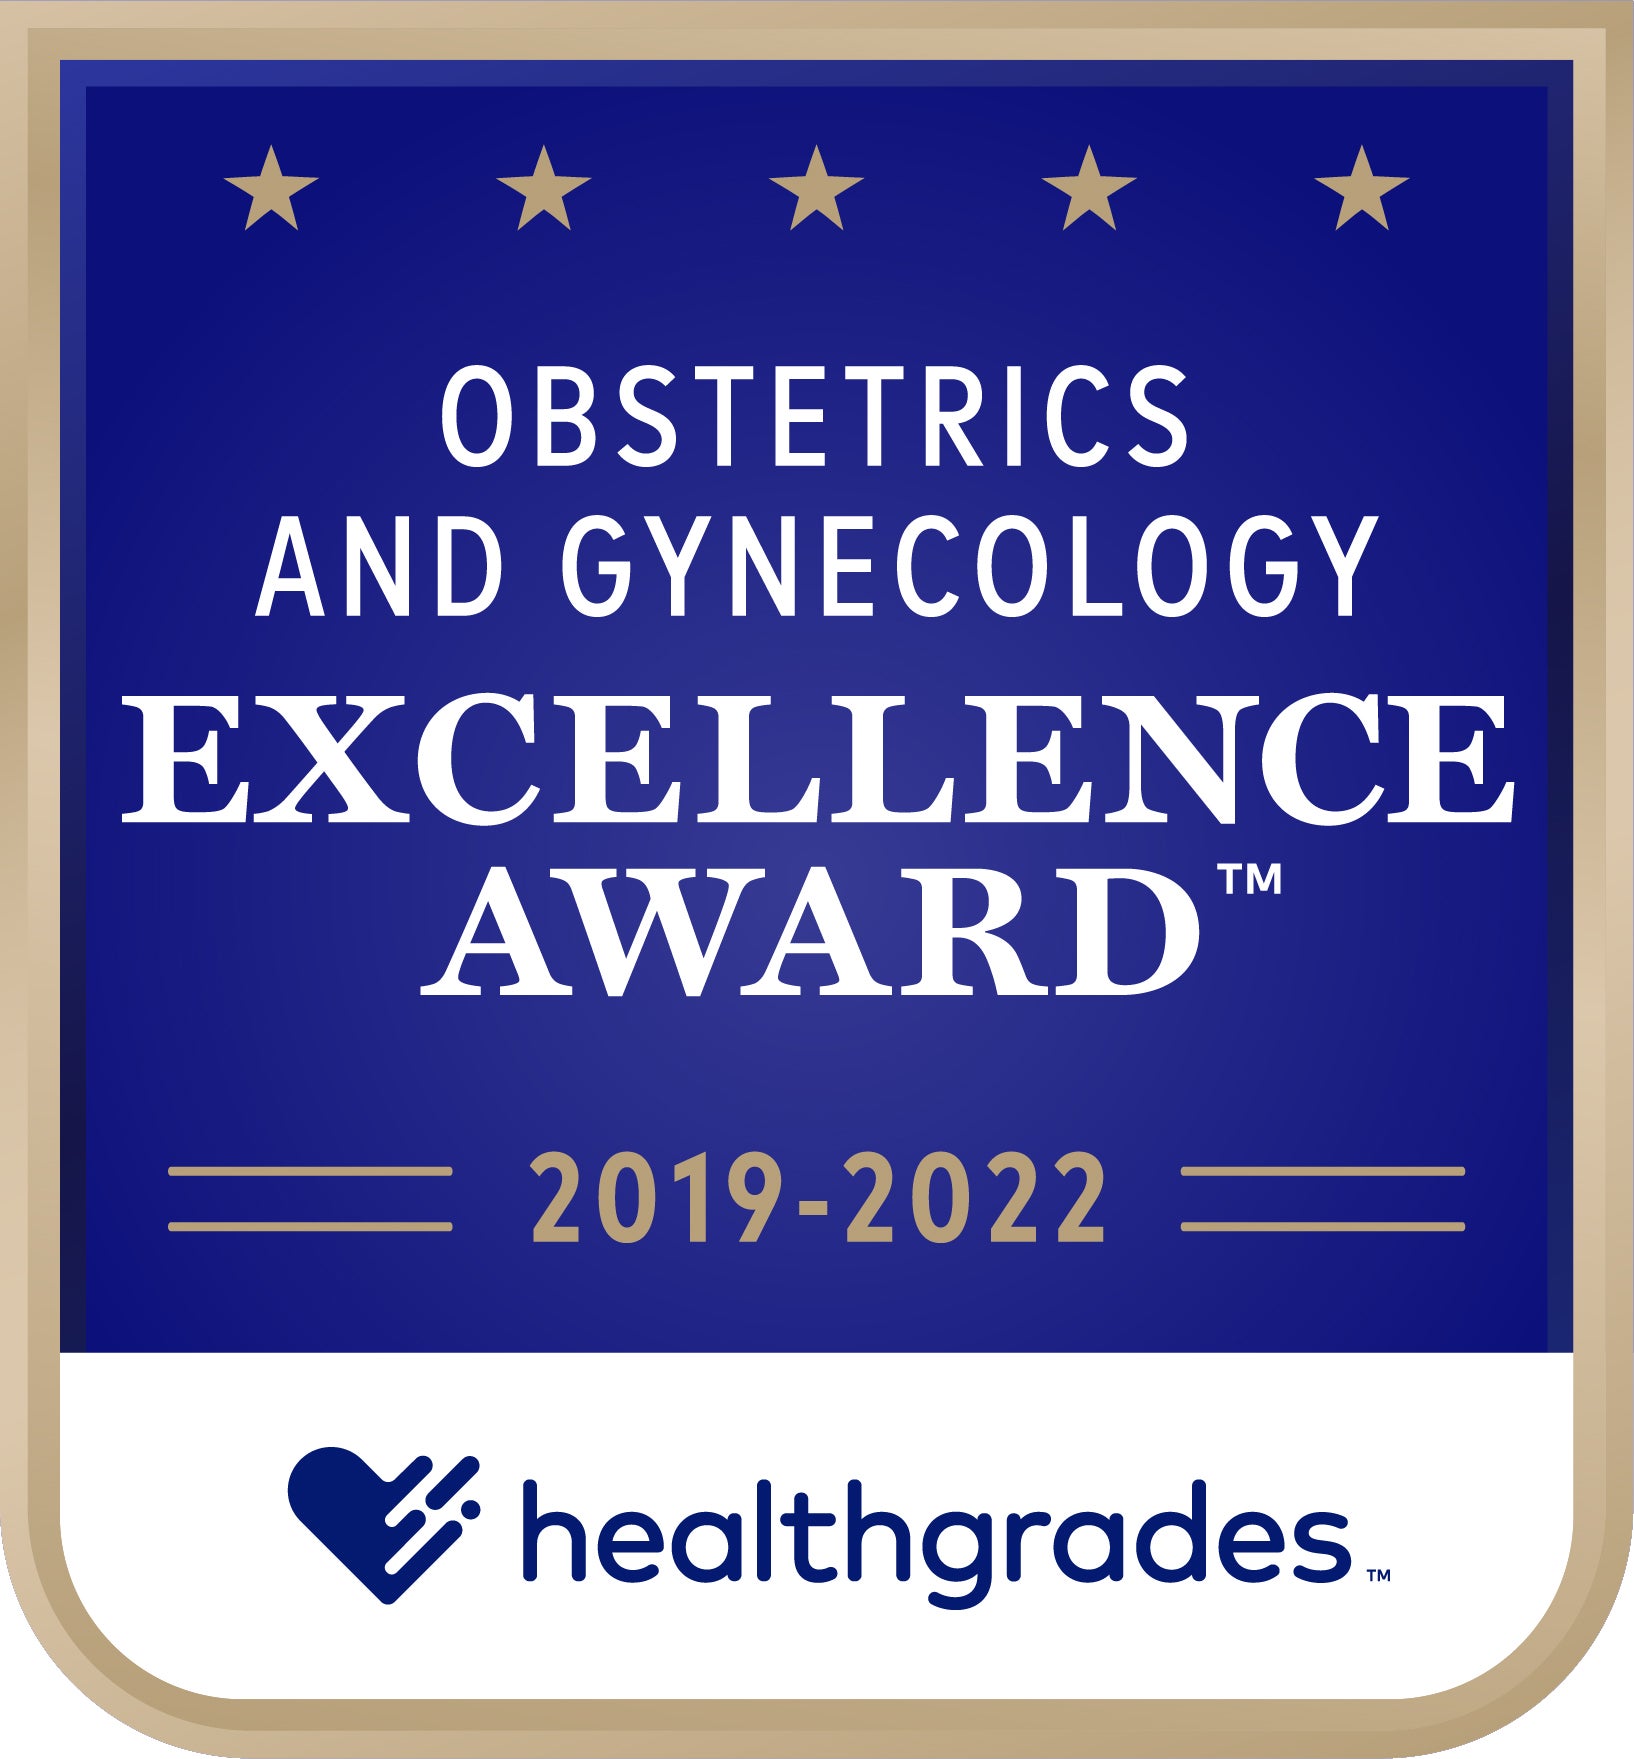 Recipient of the Healthgrades Obstetrics and Gynecology Excellence Award™ for 4 Years in a Row (2019-2022)